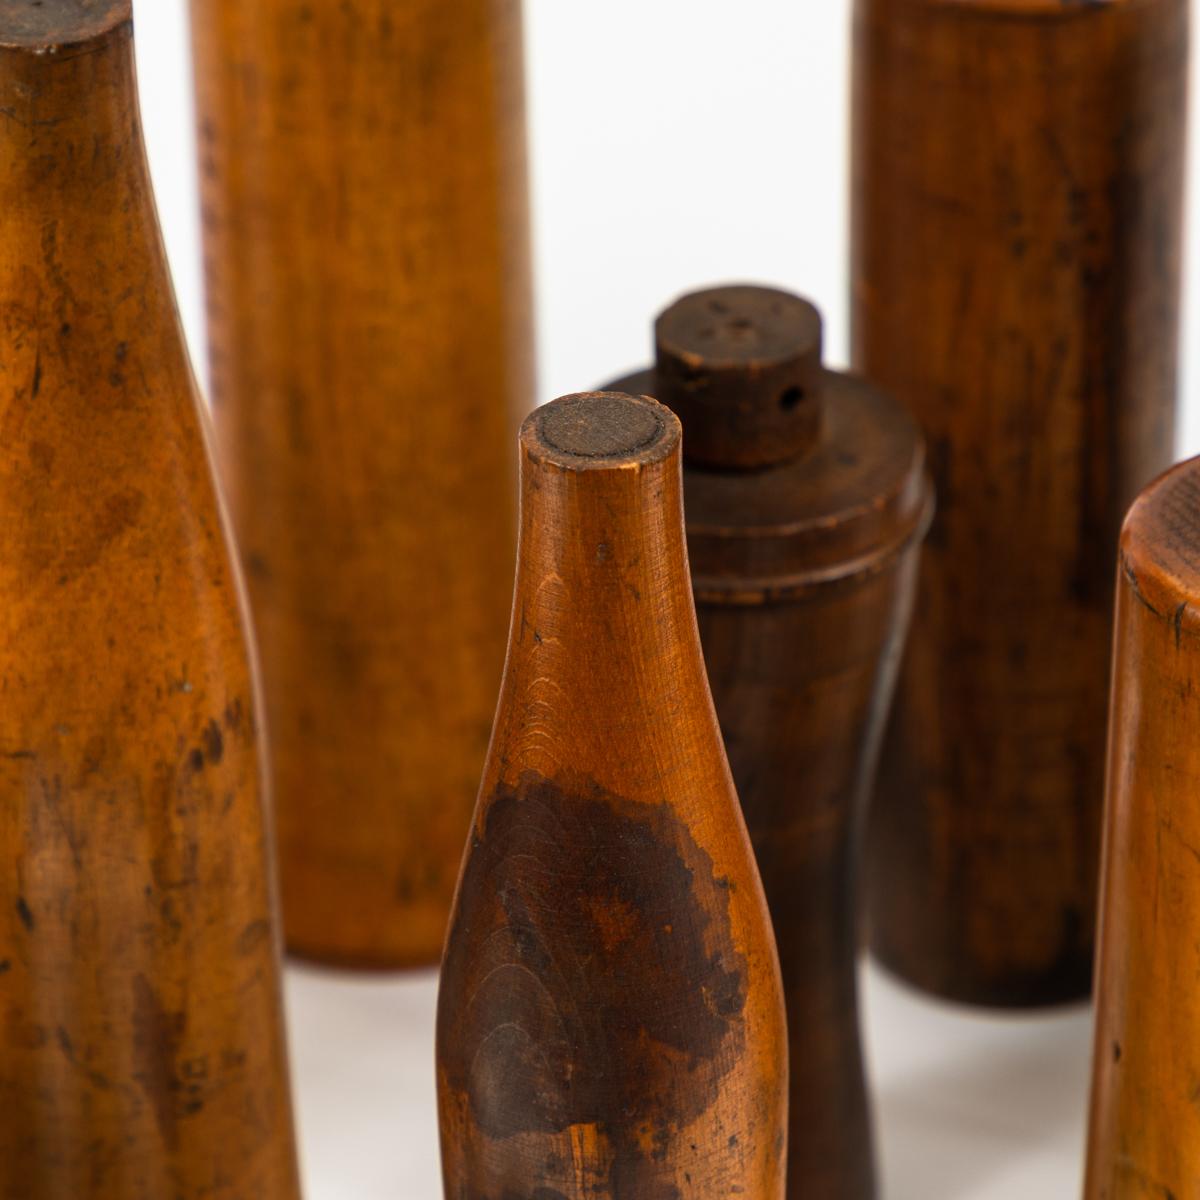 English Collection of Wooden Bottle Molds from the John Lumb and Co. Glassworks